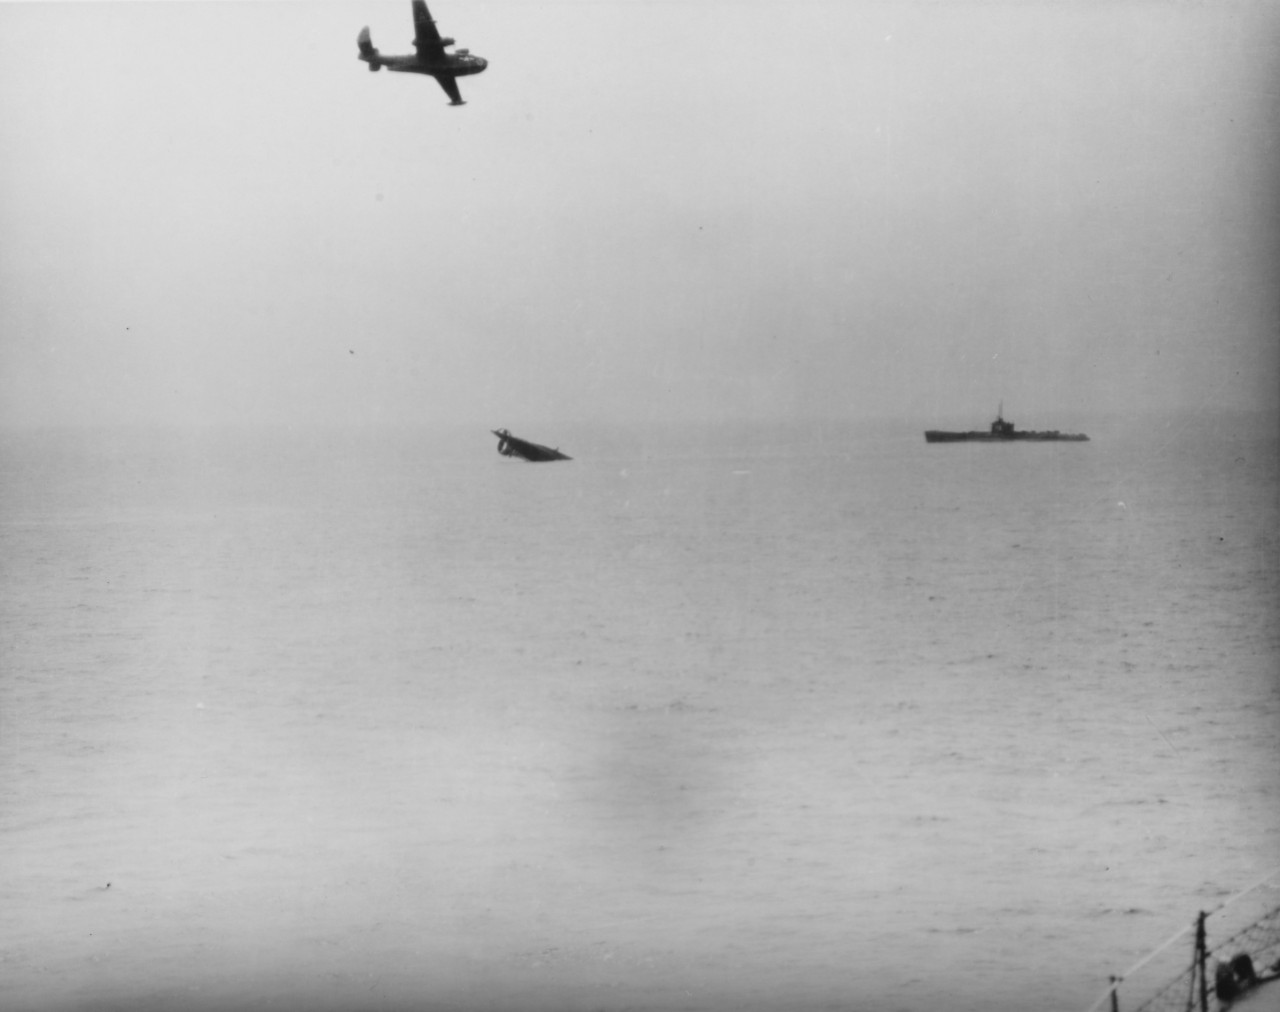 Sinking of a Japanese "I-boat" submarine, during mass scuttling of Japanese subs off Sasebo, 1 April 1946. Another submarine is awaiting sinking, as a PBM flies overhead.